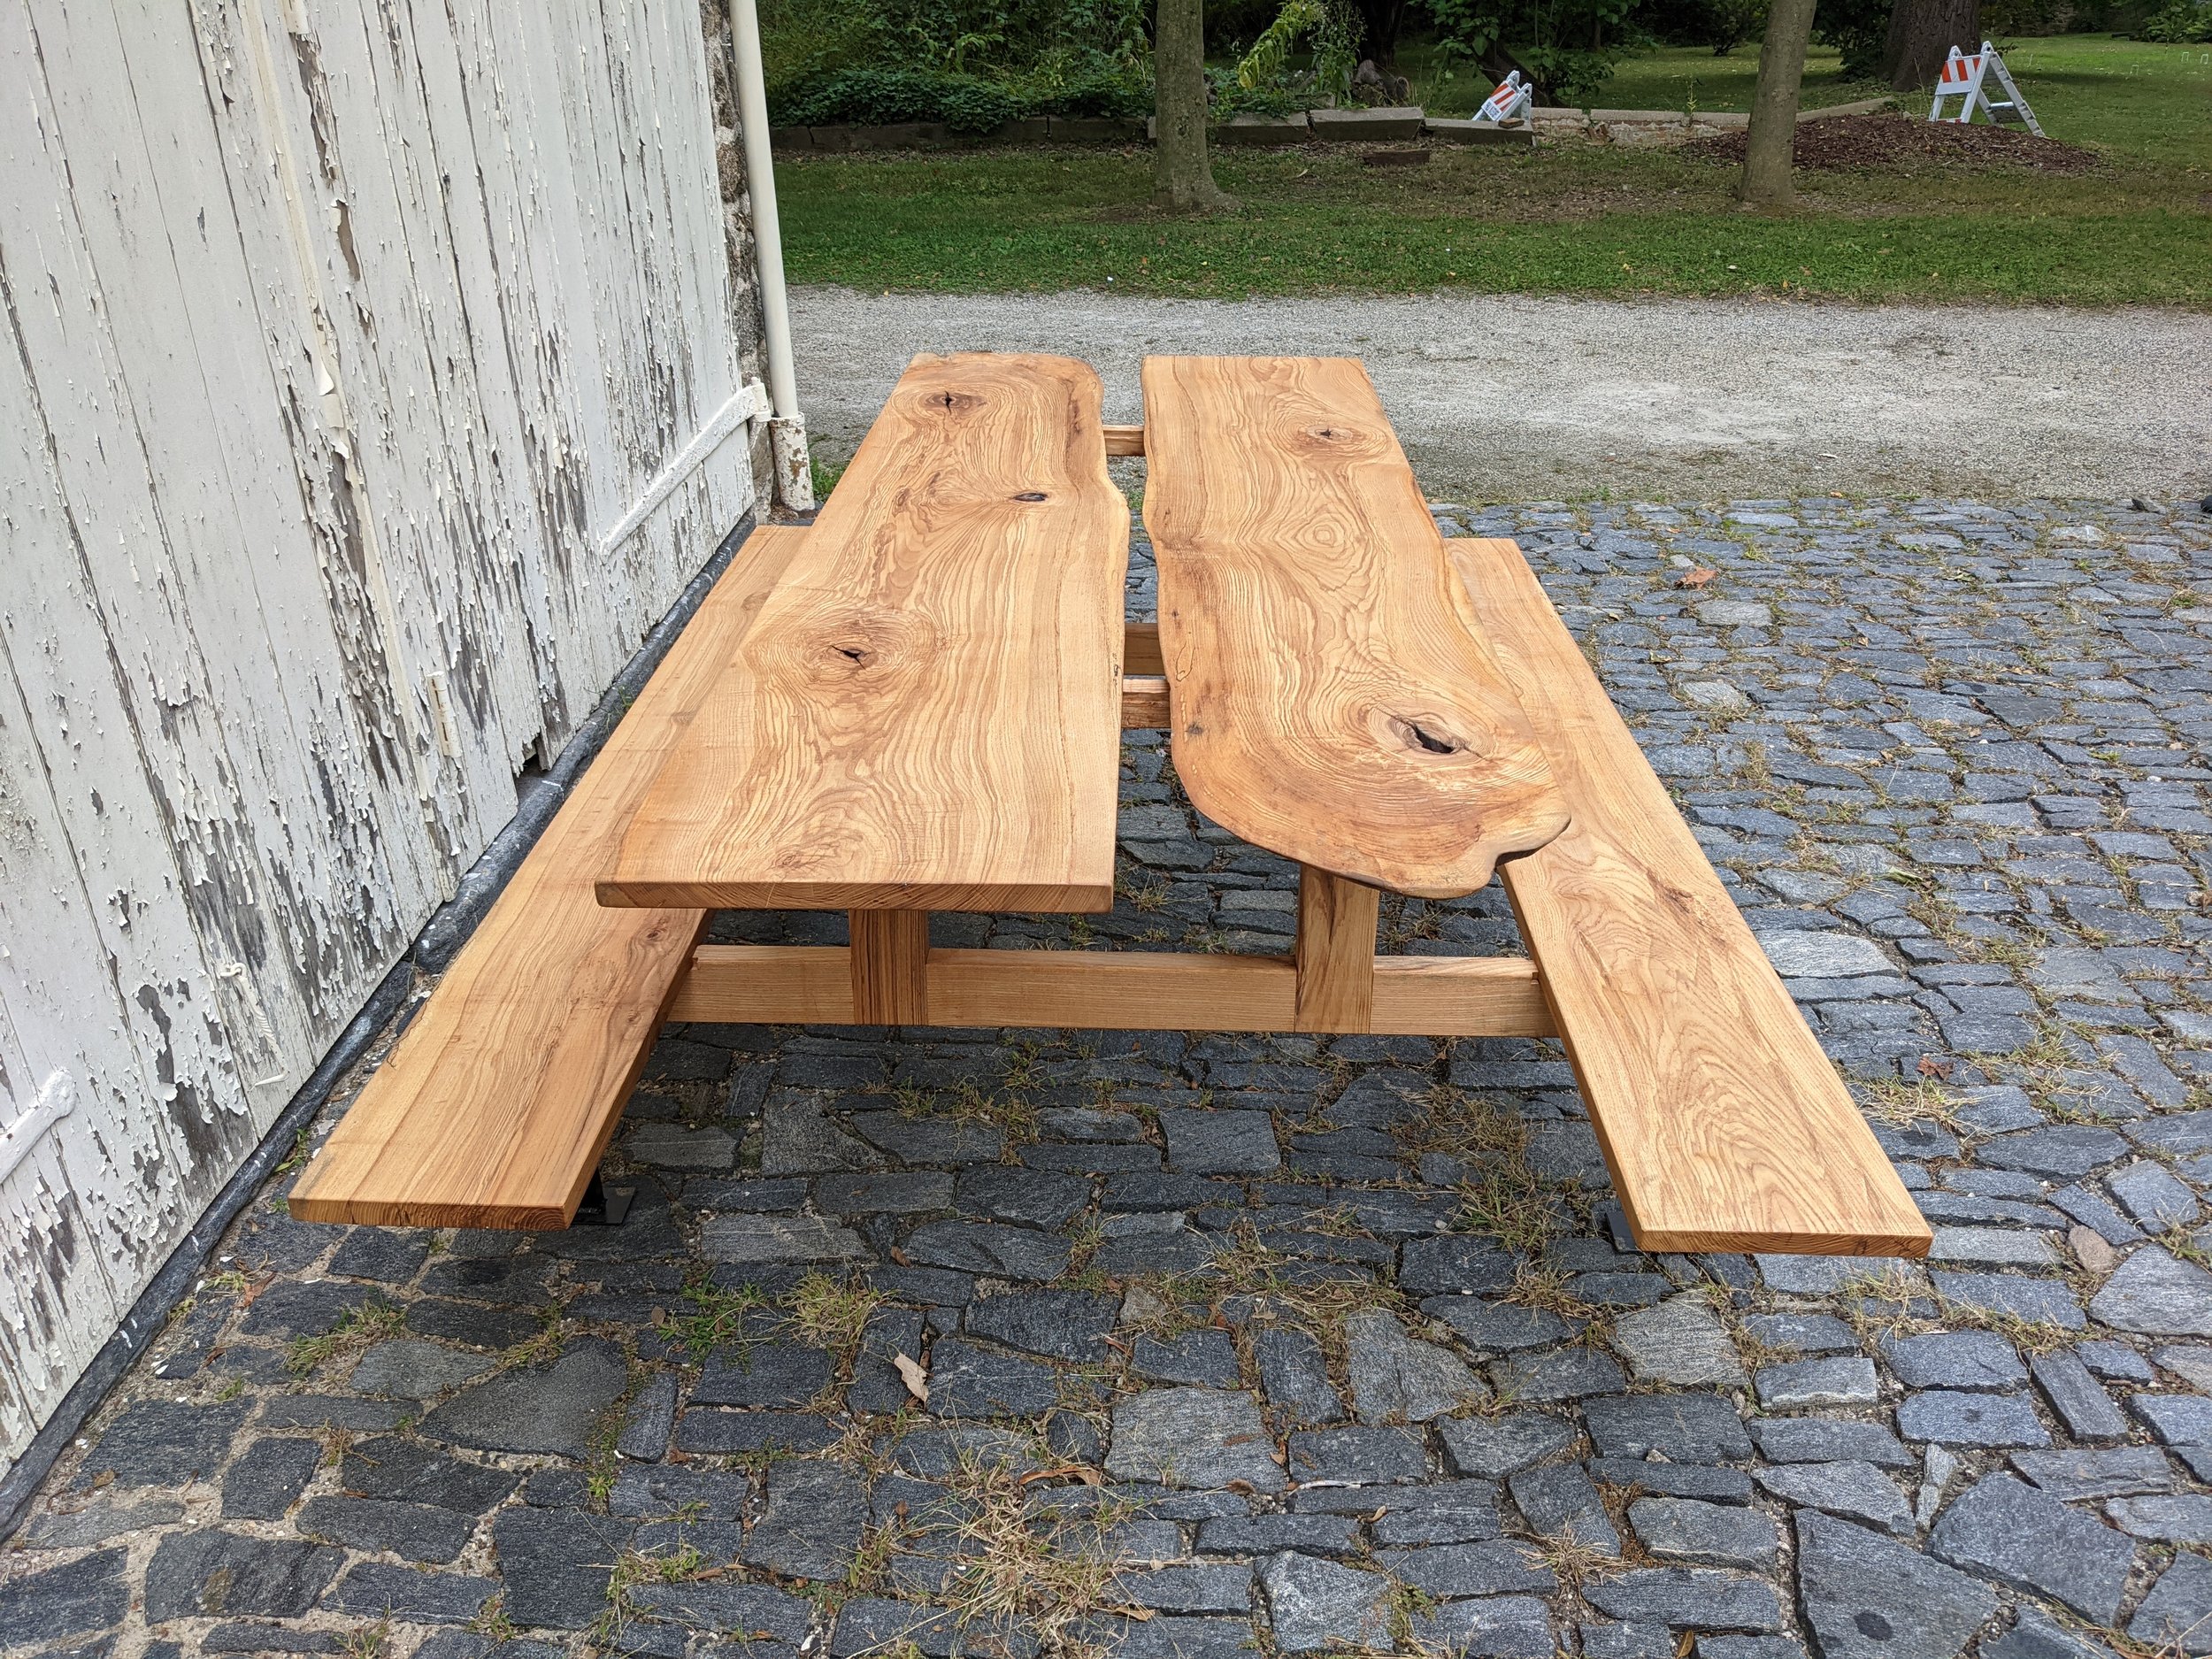  ash picnic table for the Historic Cliveden House in Germantown, Philadelphia 